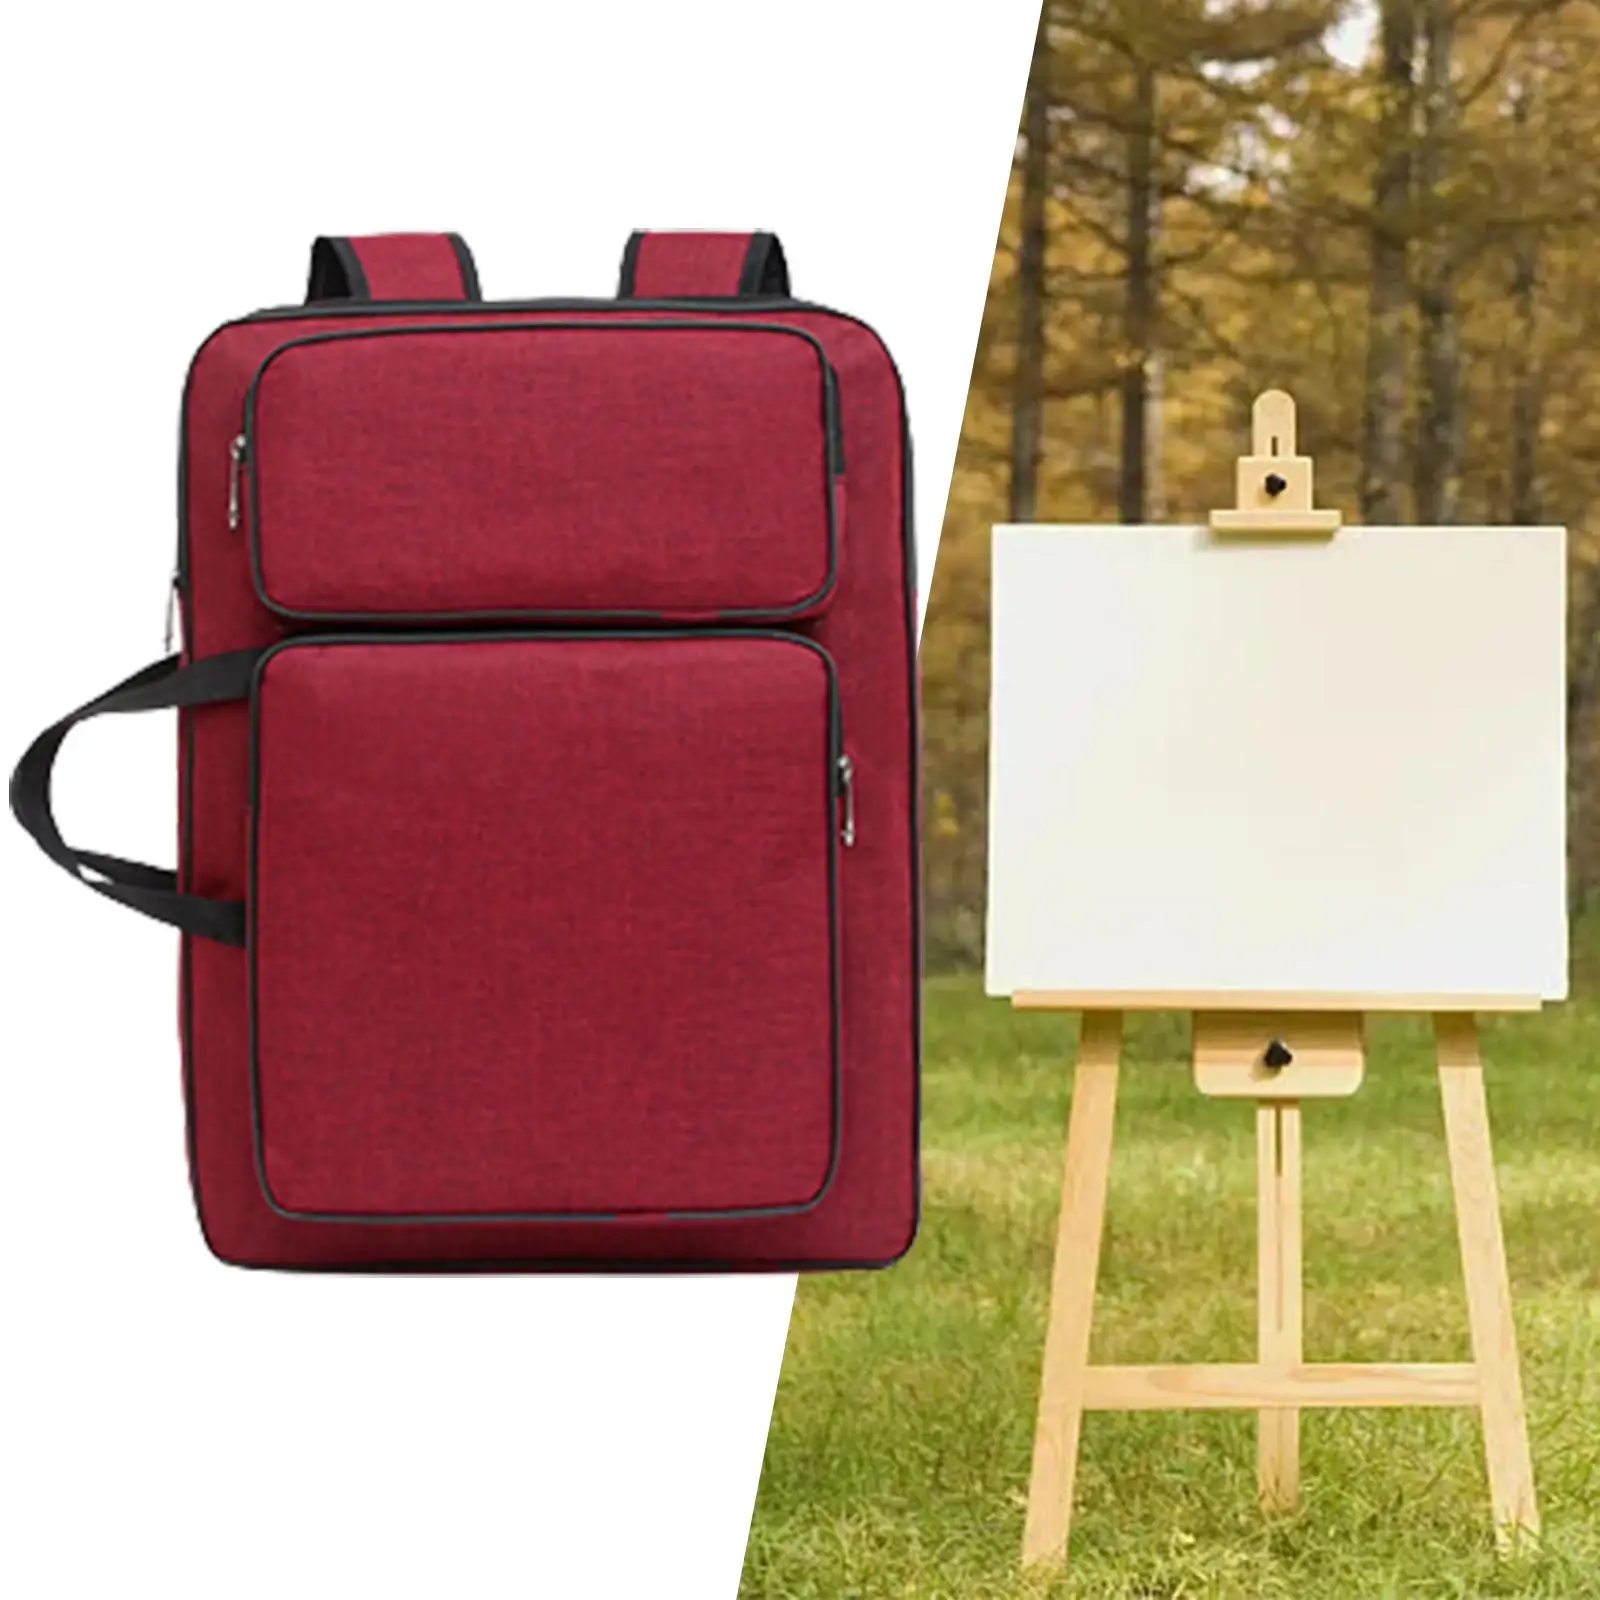 Draw Board Storage Tote Art Portfolio Case for Painting Supplies Stationery